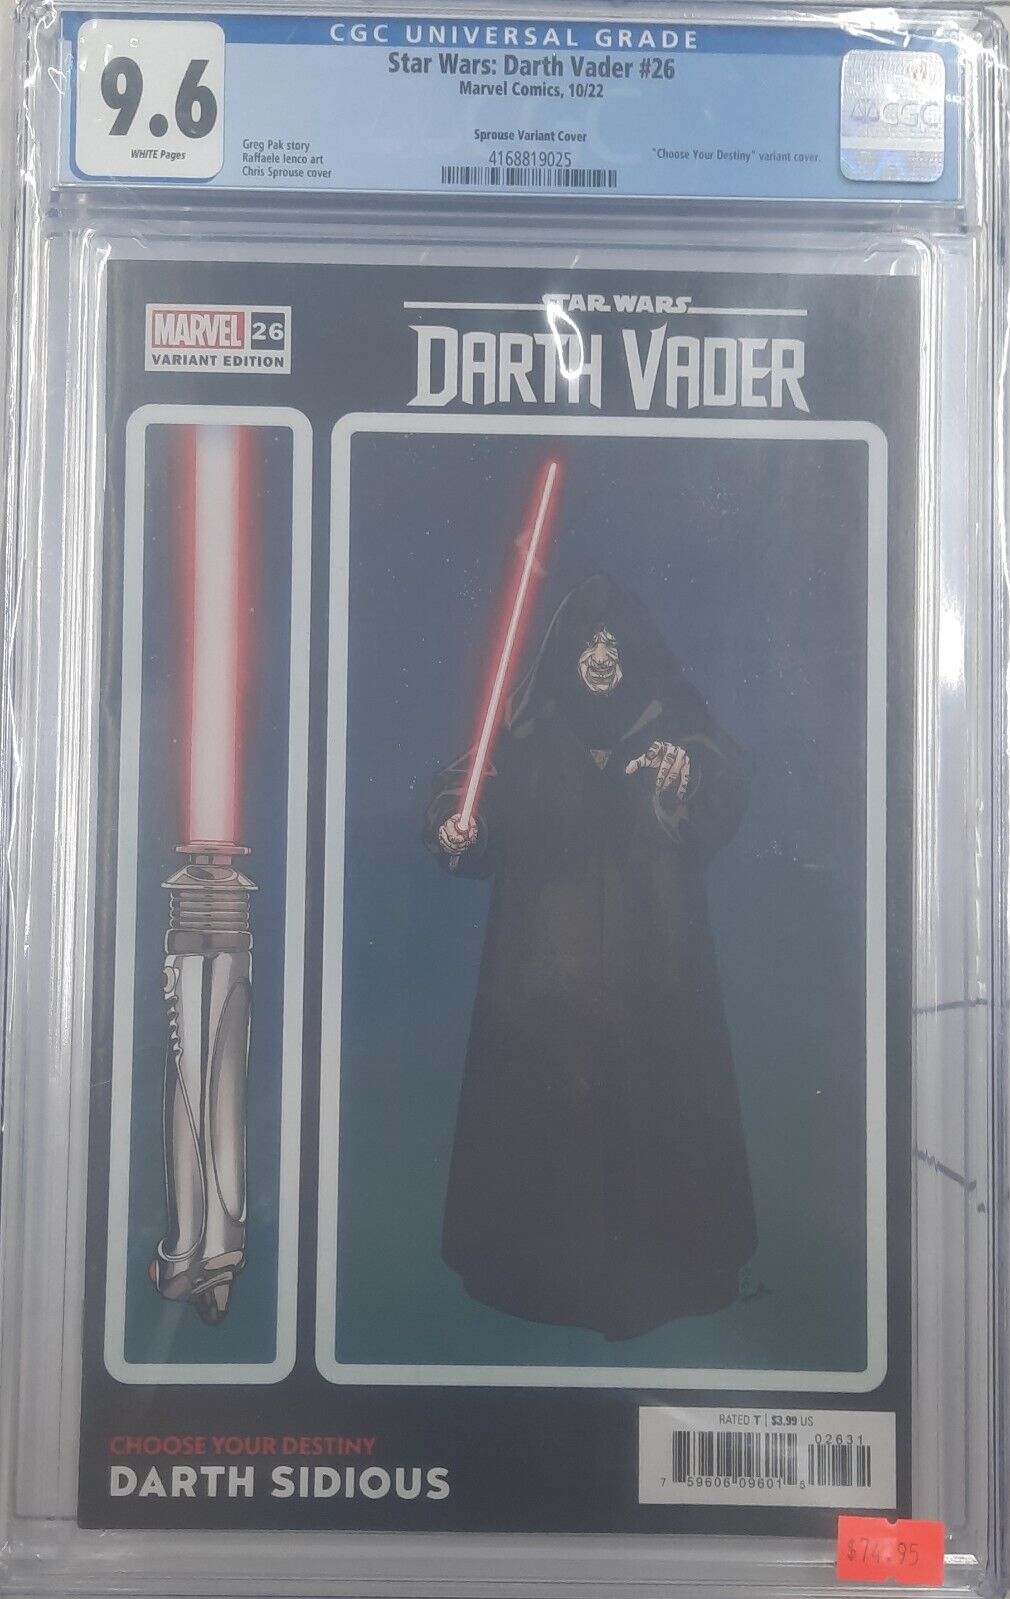 CGC 9.6 Star Wars: Darth Vader #26 Marvel Comics, 10/22 Sprouse Variant Cover